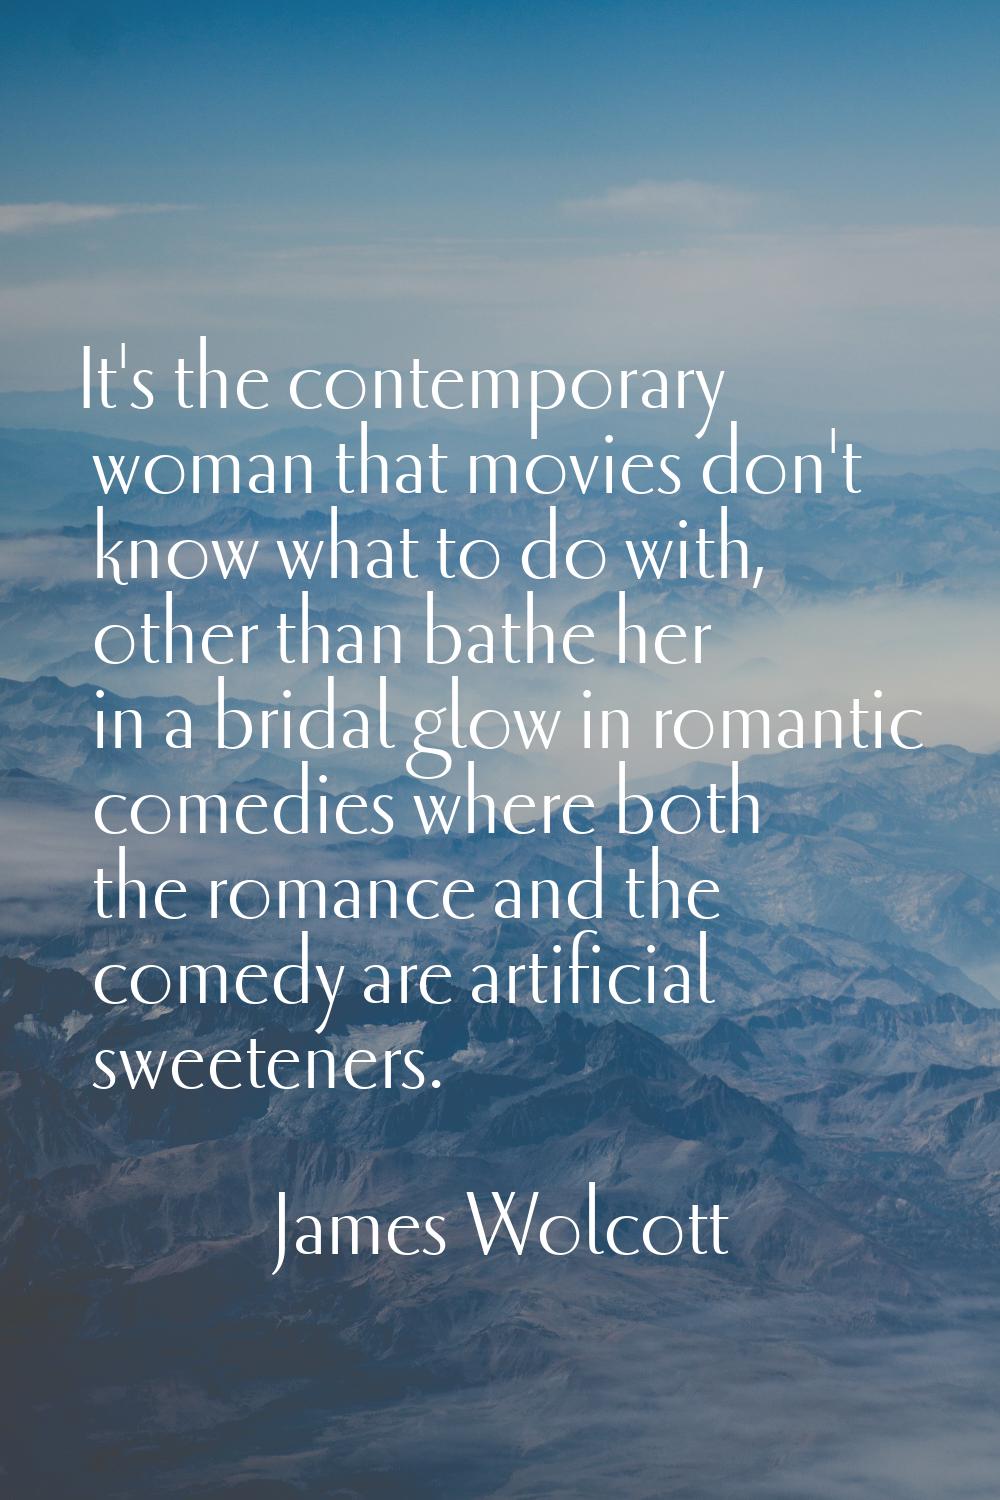 It's the contemporary woman that movies don't know what to do with, other than bathe her in a brida